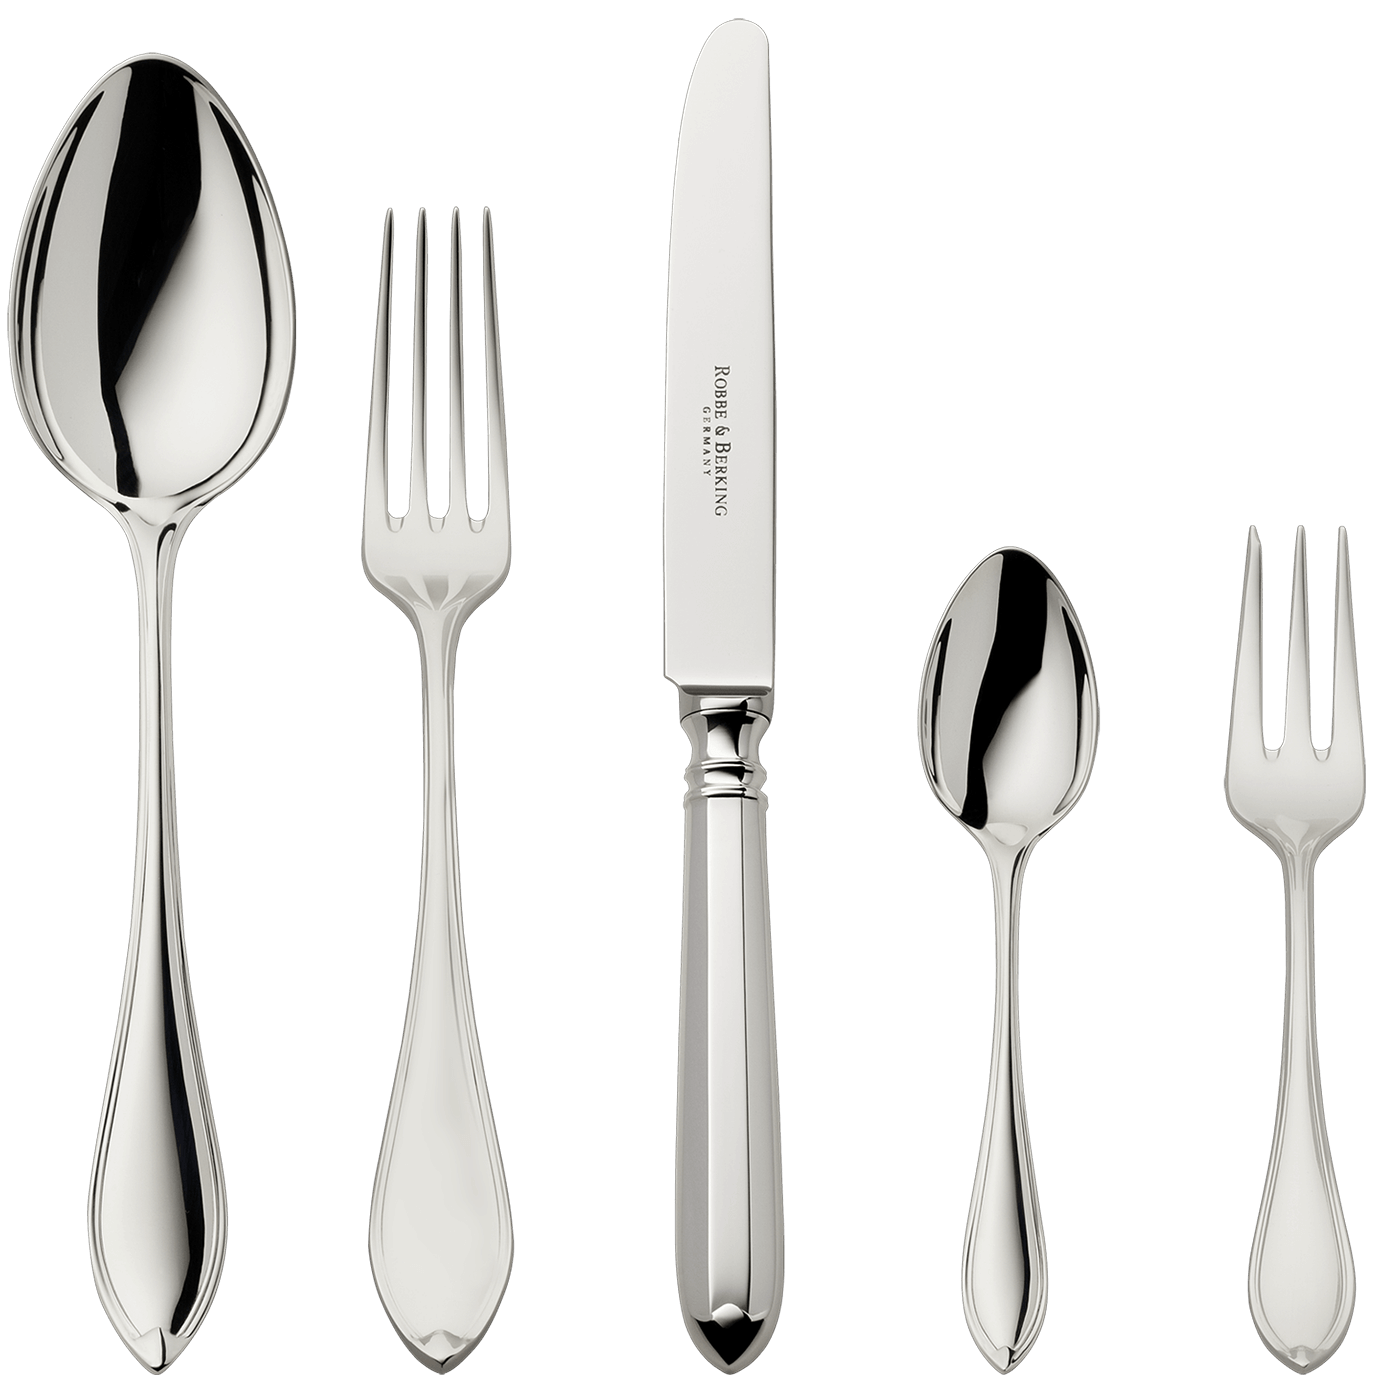 Navette 5-piece place setting (150g massive silverplated)